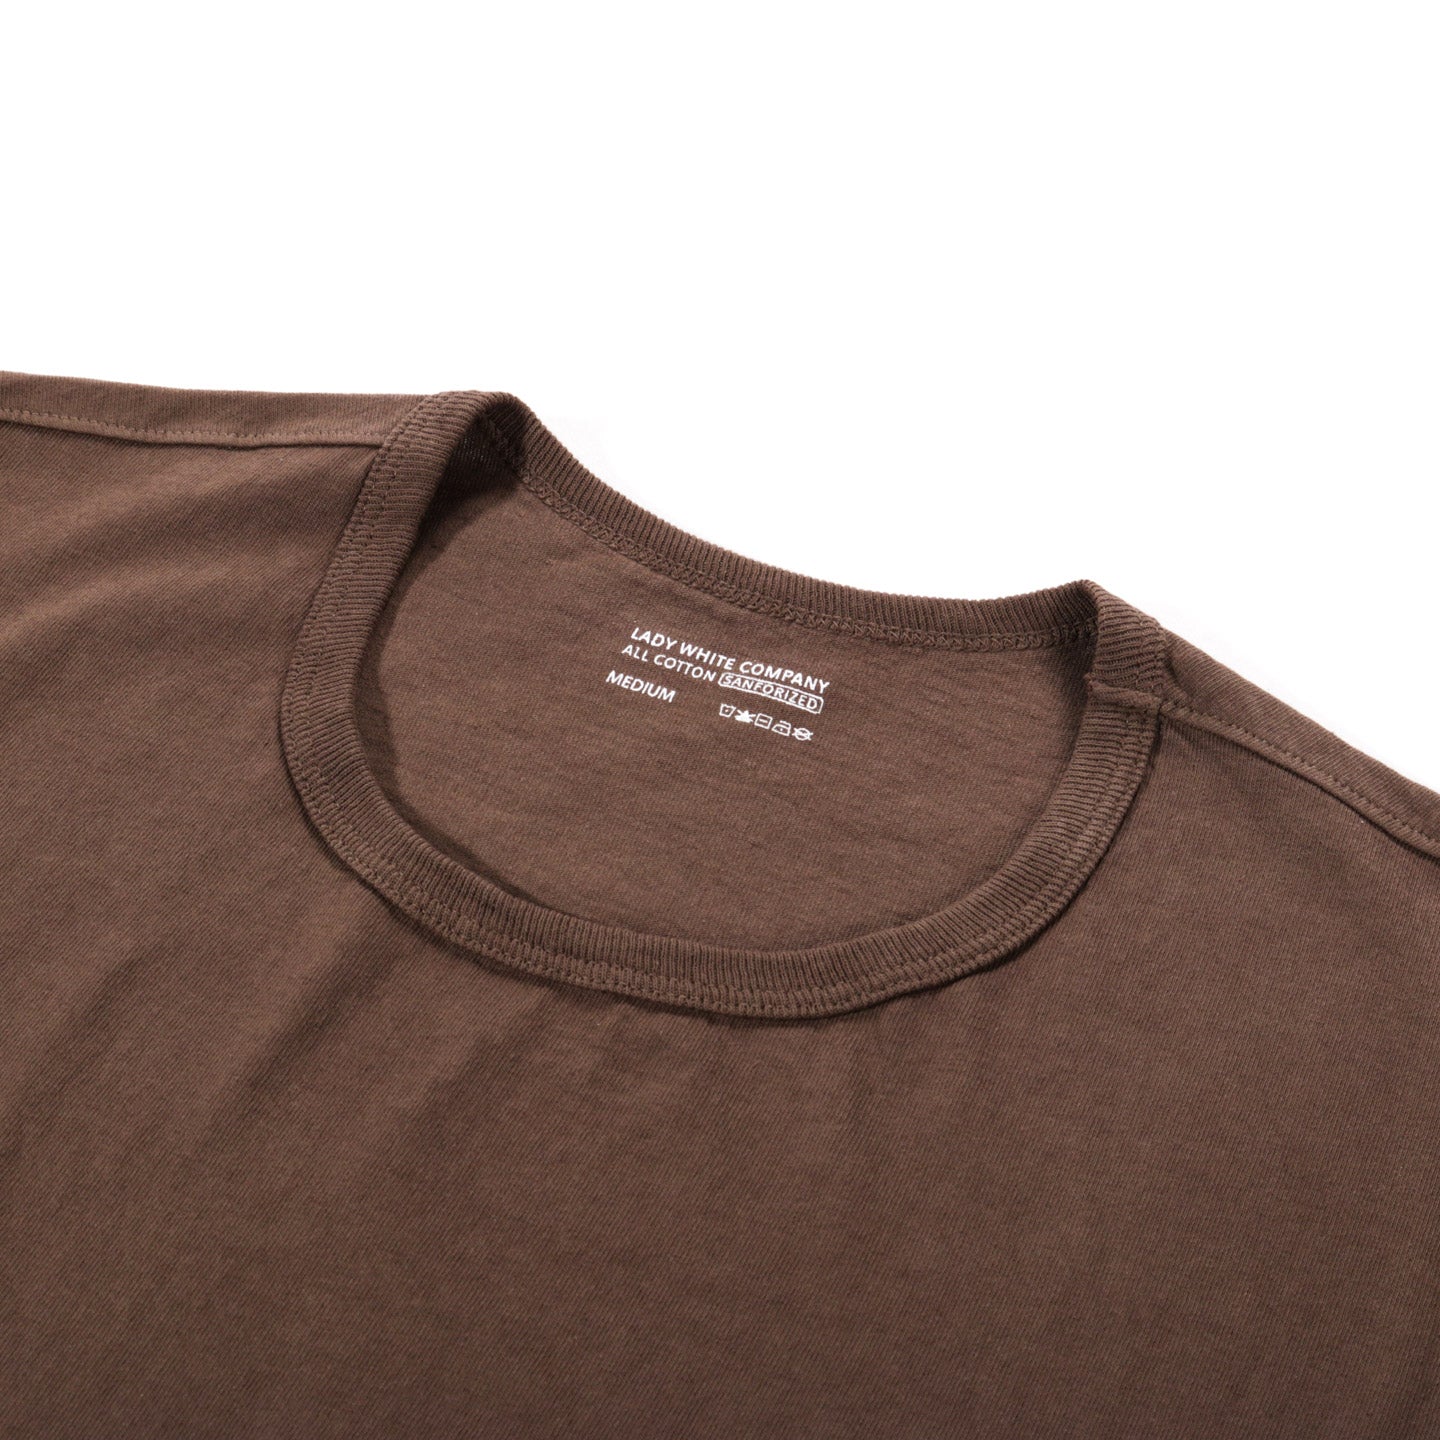 LADY WHITE CO. T-SHIRT DARK TAUPE